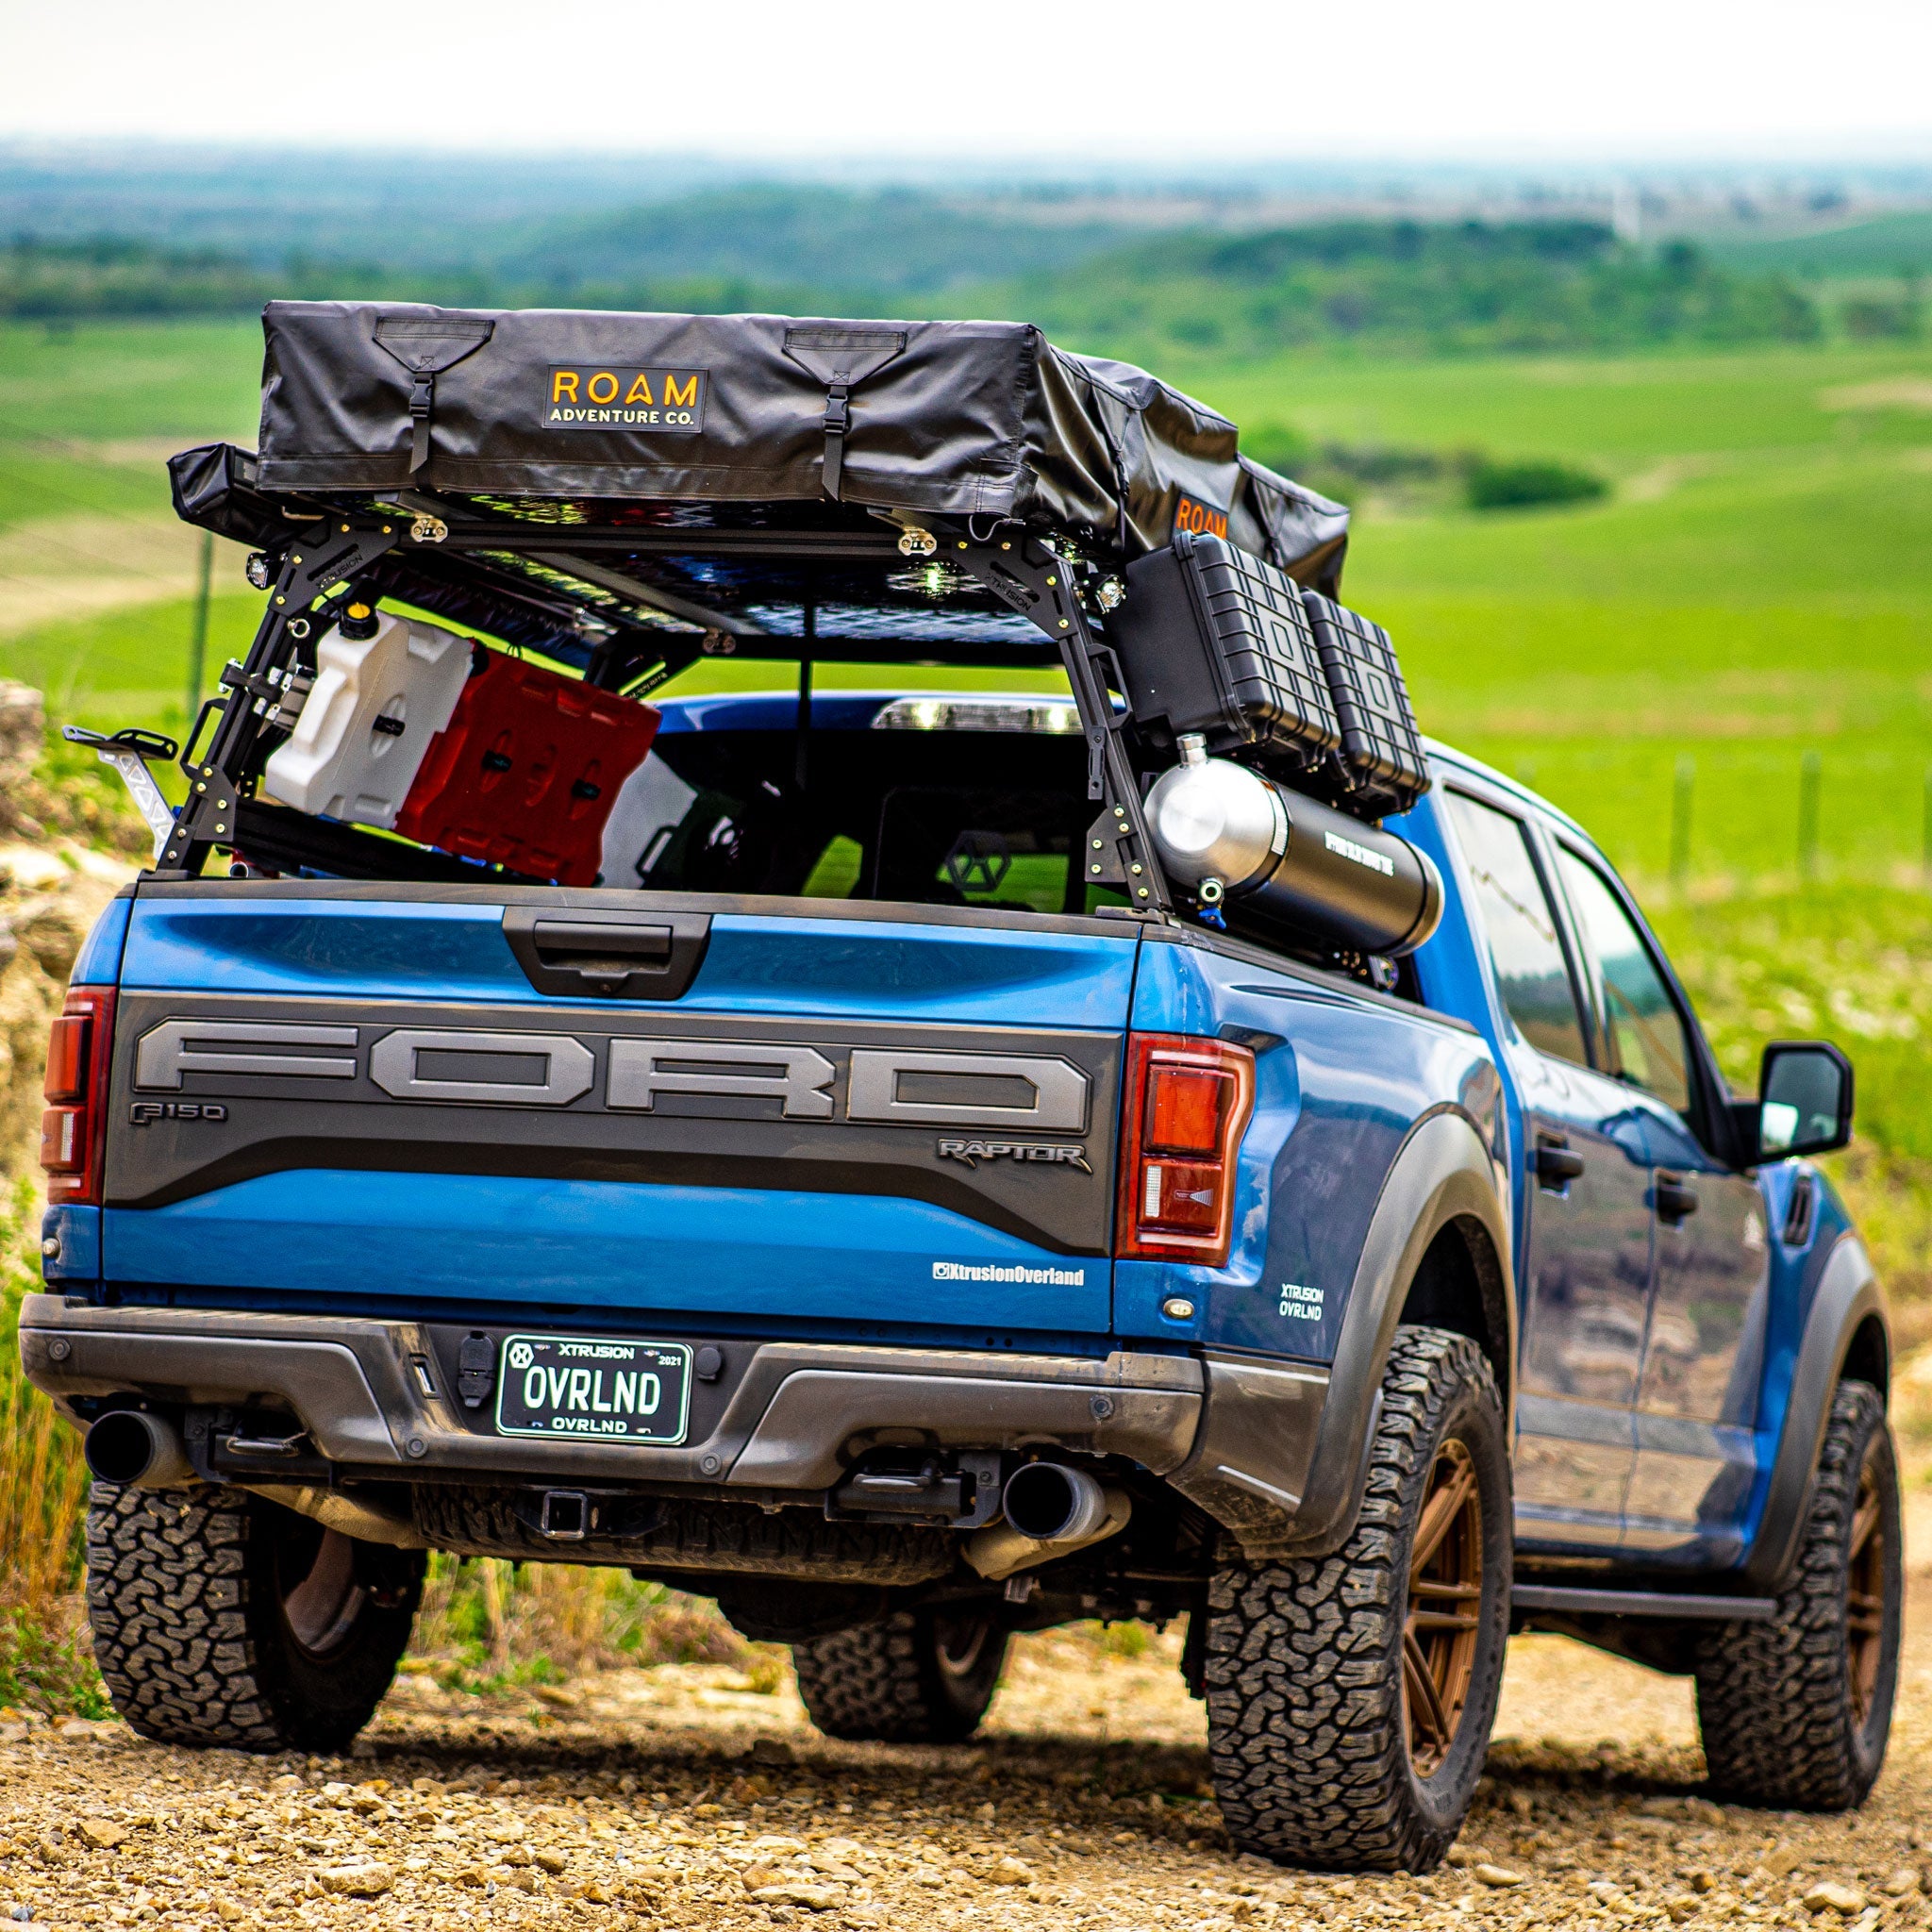 Gen 2 Ford Raptor Extrusion Overland Bed Rack with Rotopax’s mounted, Molle panels, Roof top tent, awning, travel cases, and Pressurized solar water tank.